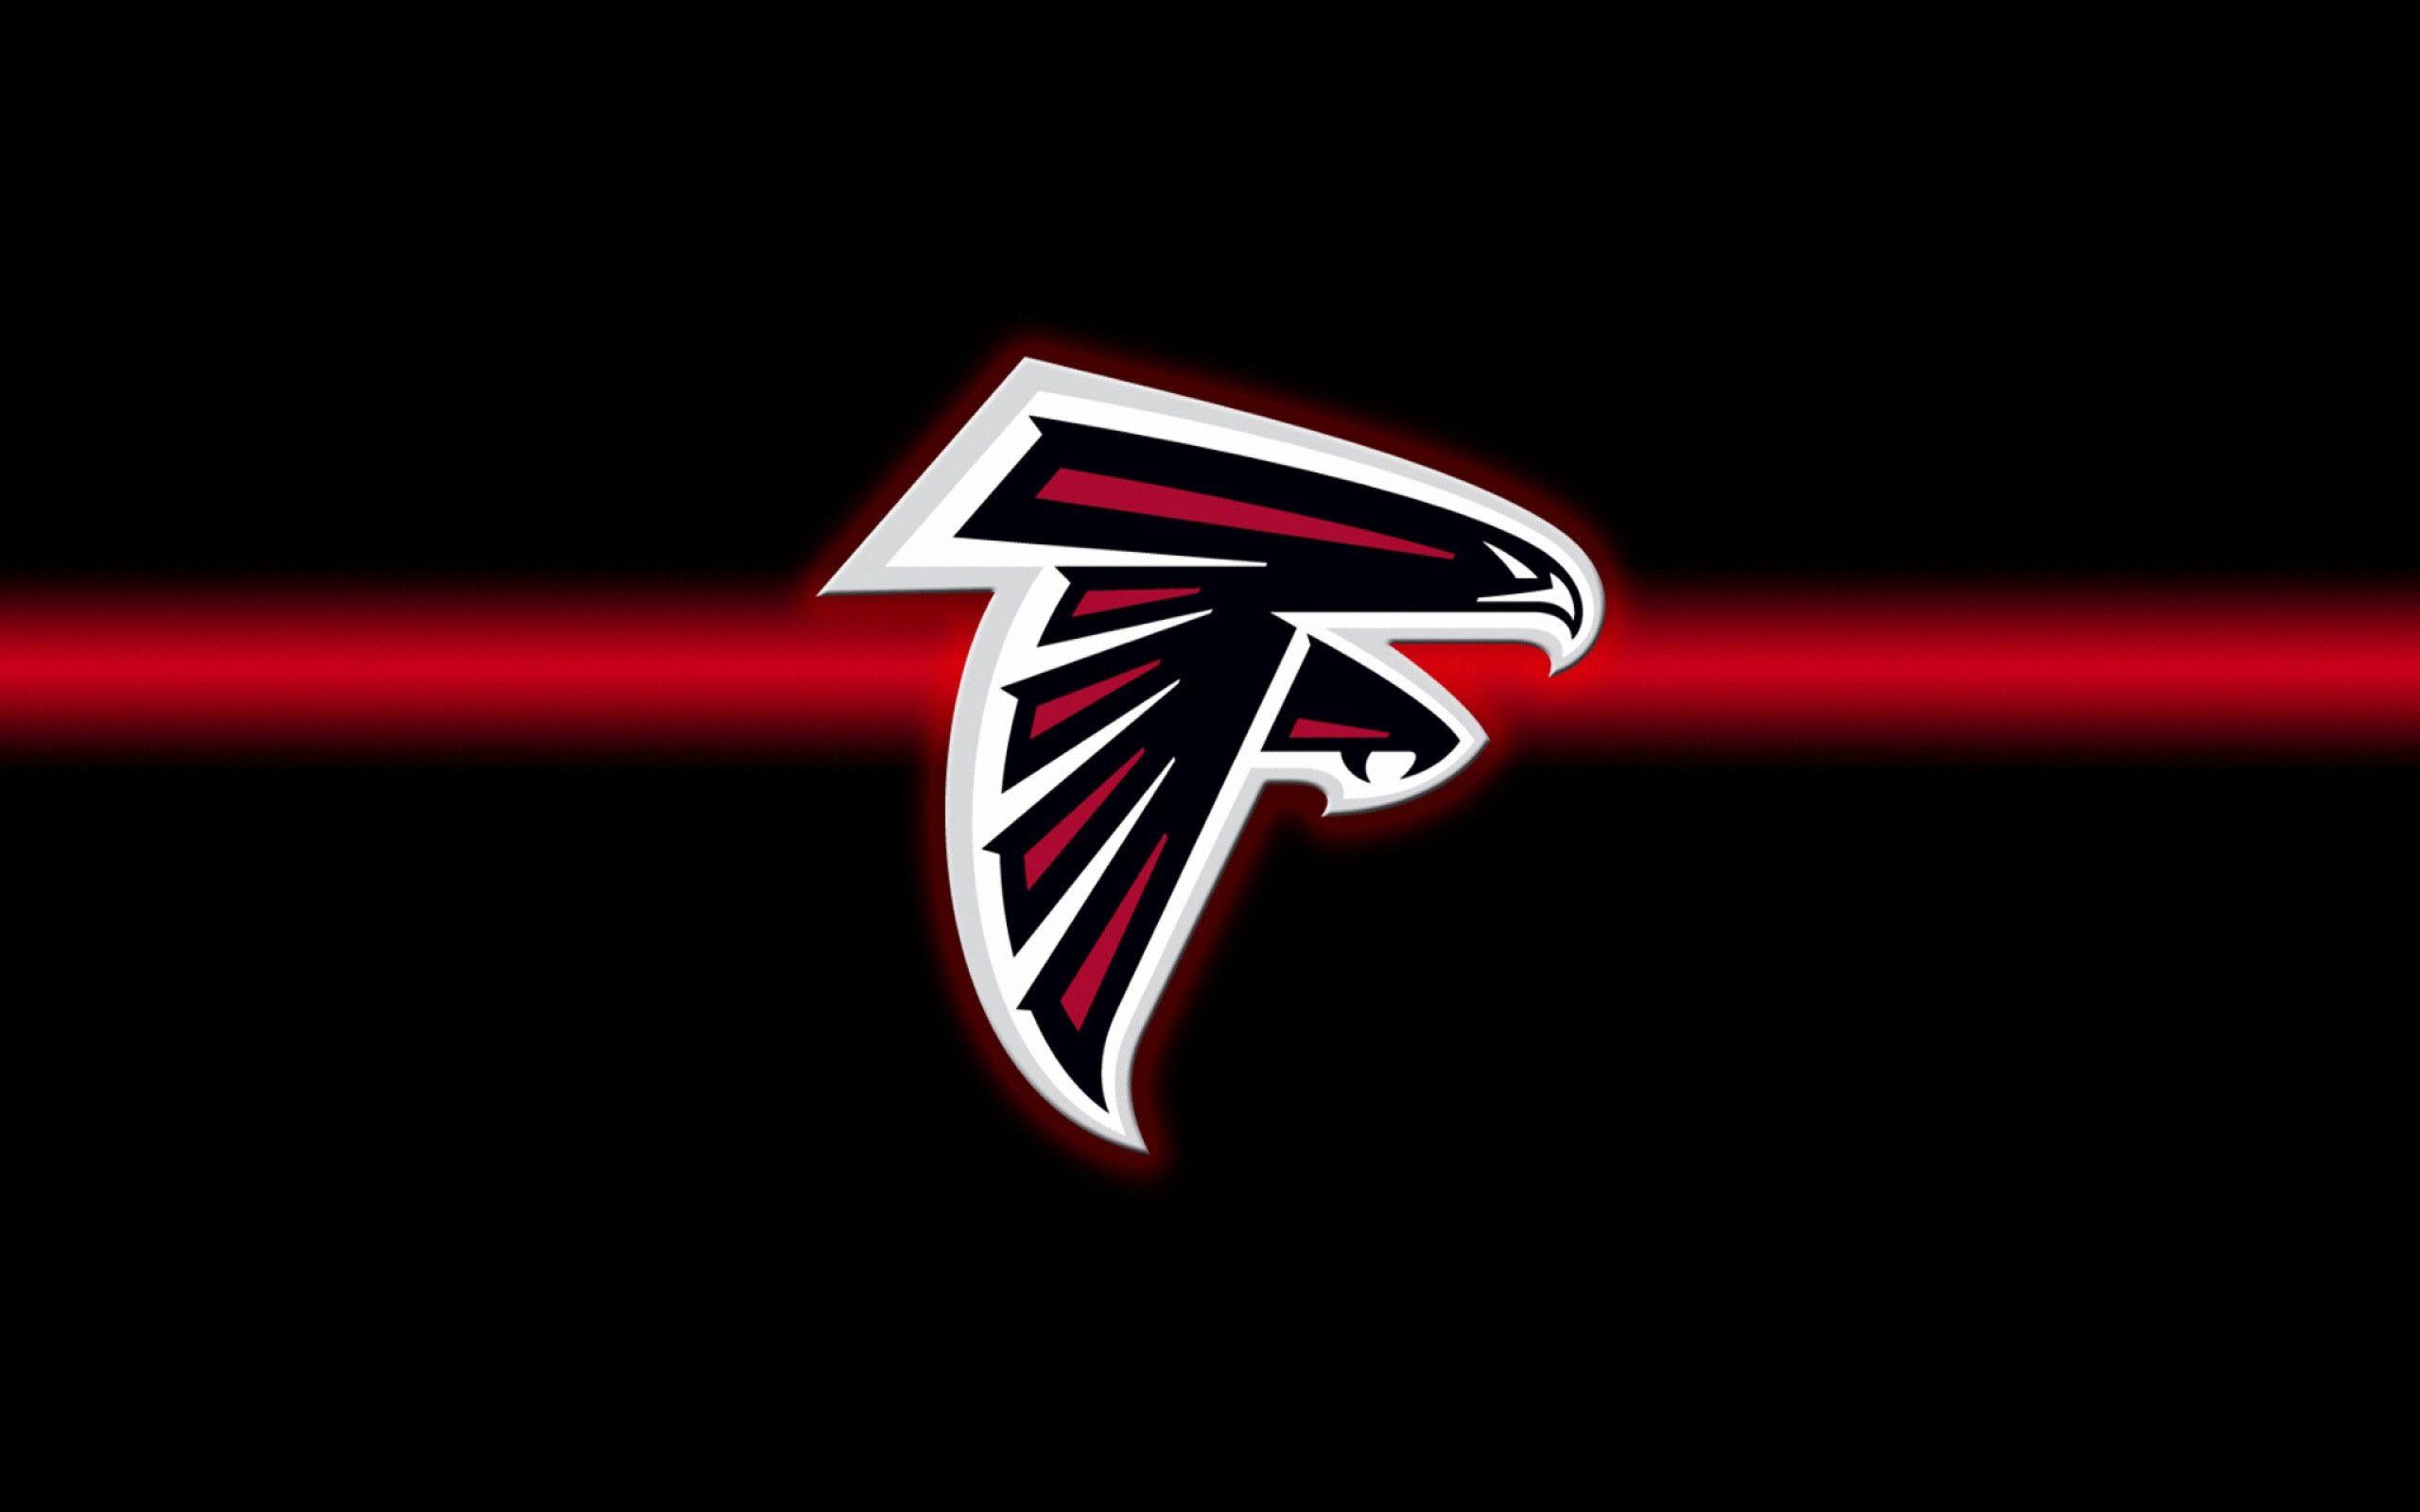 Falcons iPhone Wallpapers on WallpaperDog